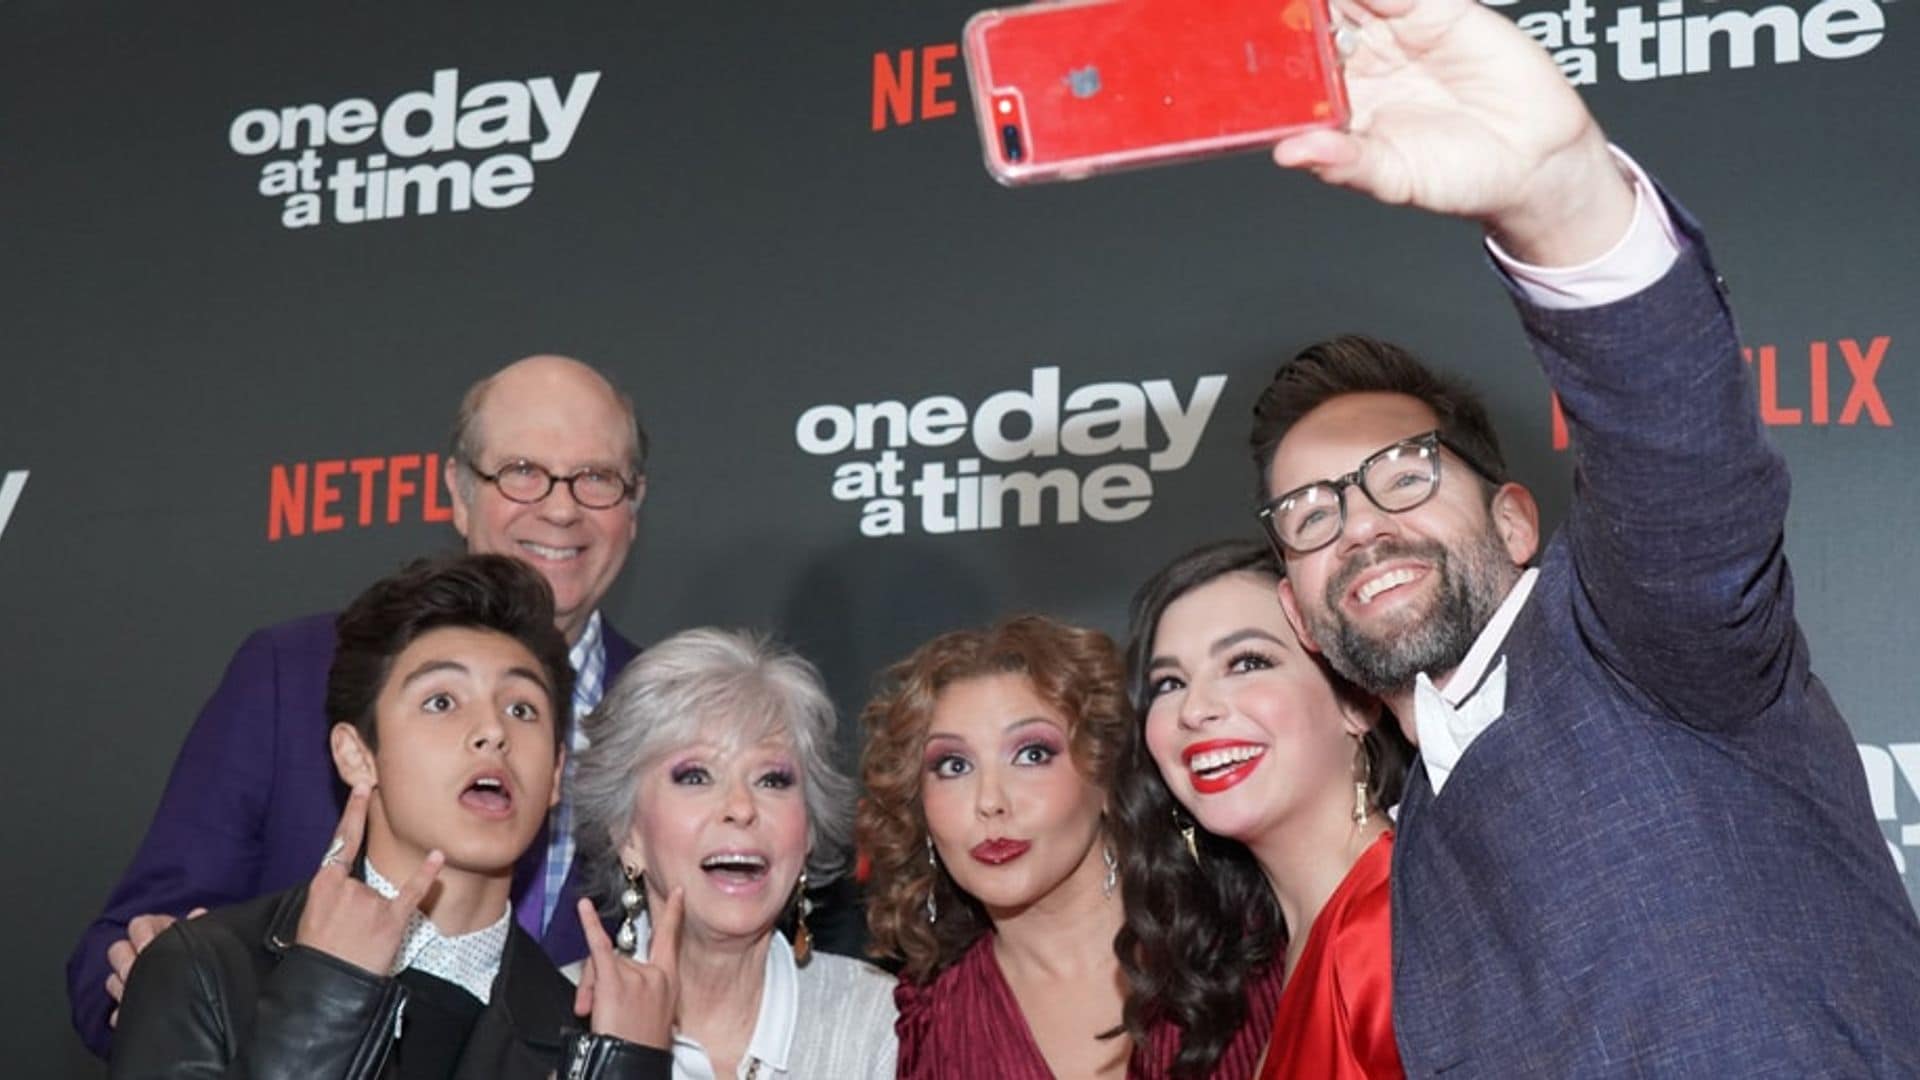 One Day at a Time cast 'hopeful' of getting picked up by different network